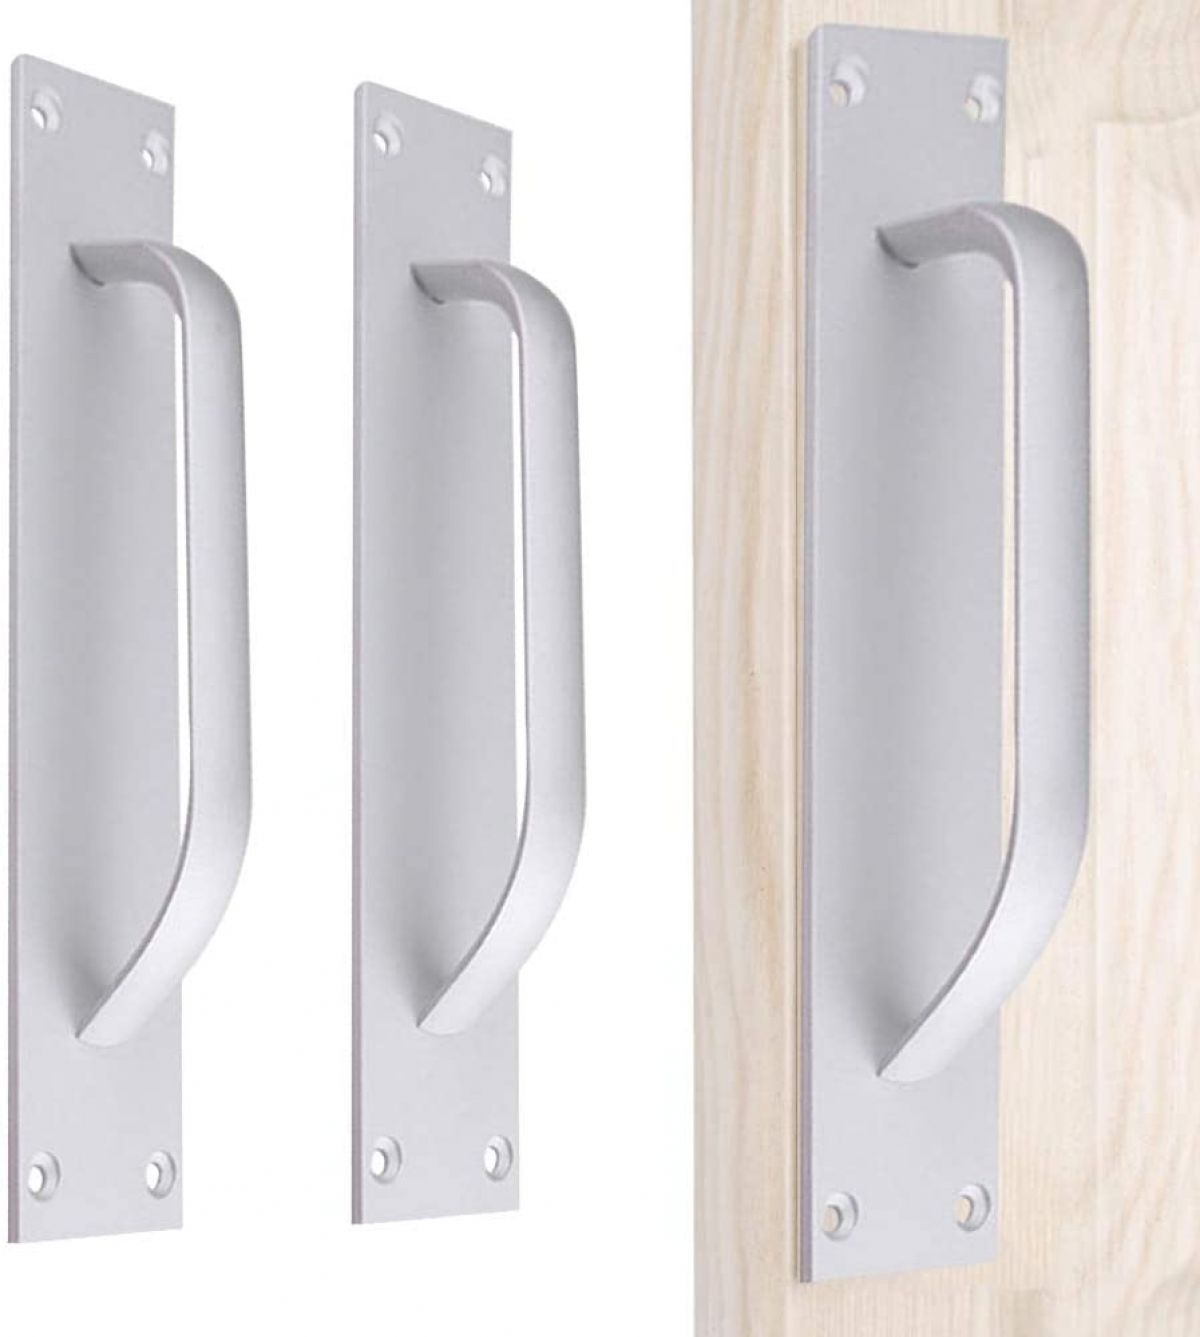 Furniture handles (2 pieces included)